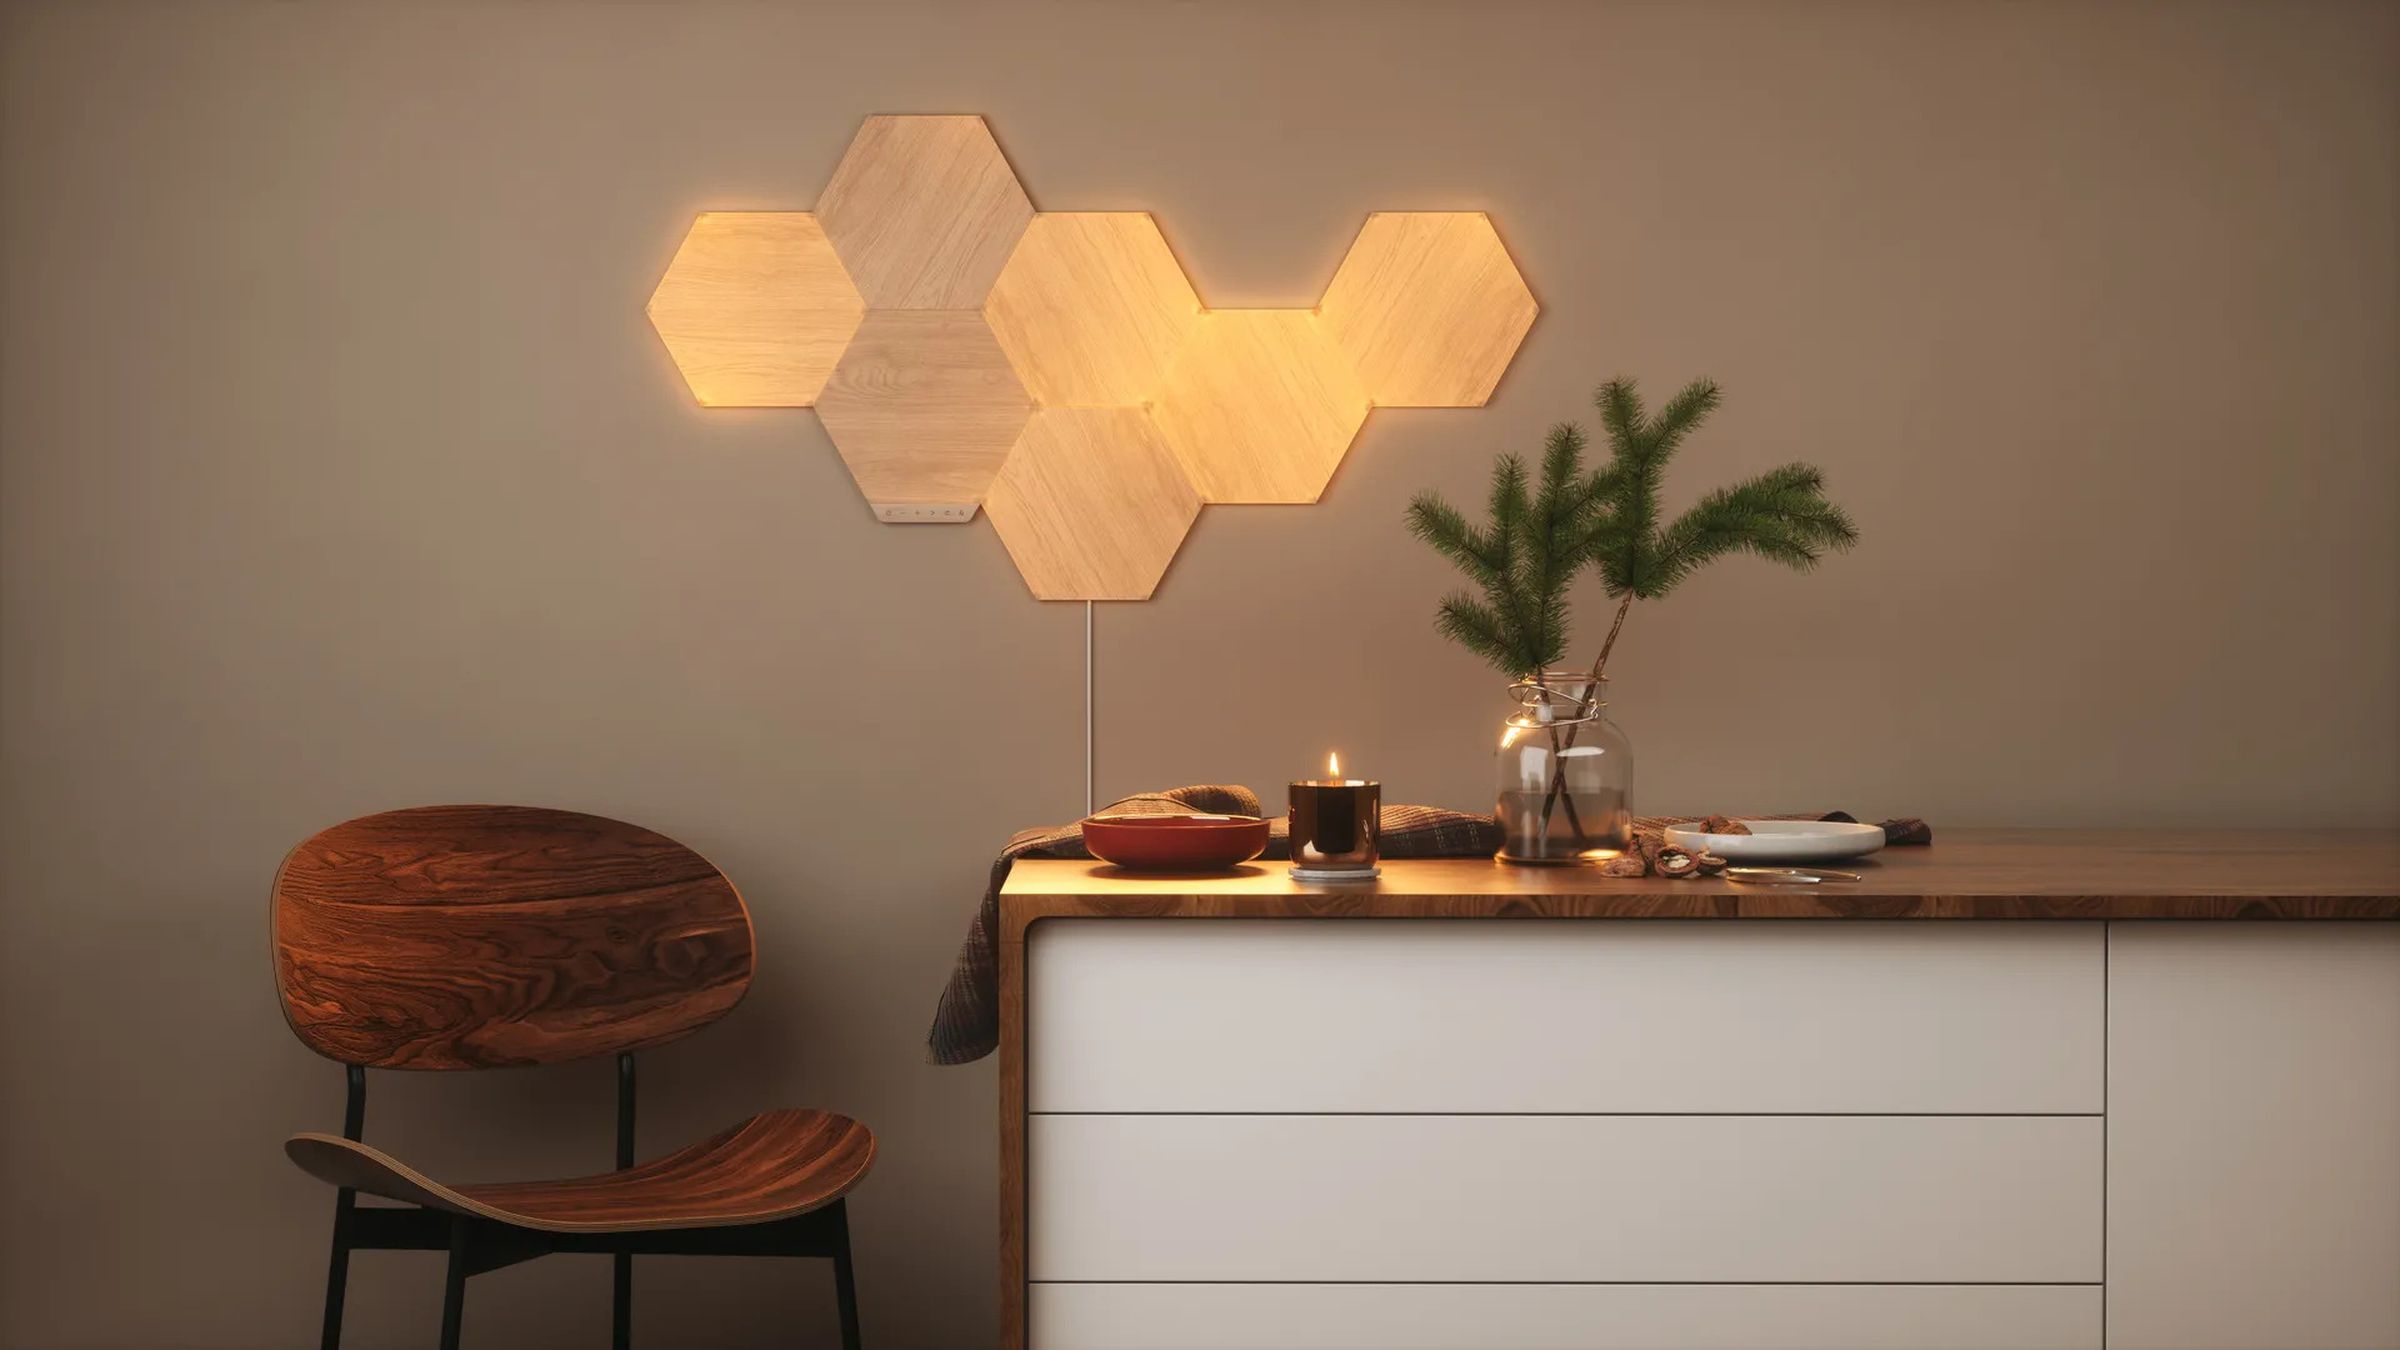 The Nanoleaf Elements lighting panels are Thread border routers, but it hasn’t been decided if they will be upgraded to Matter.